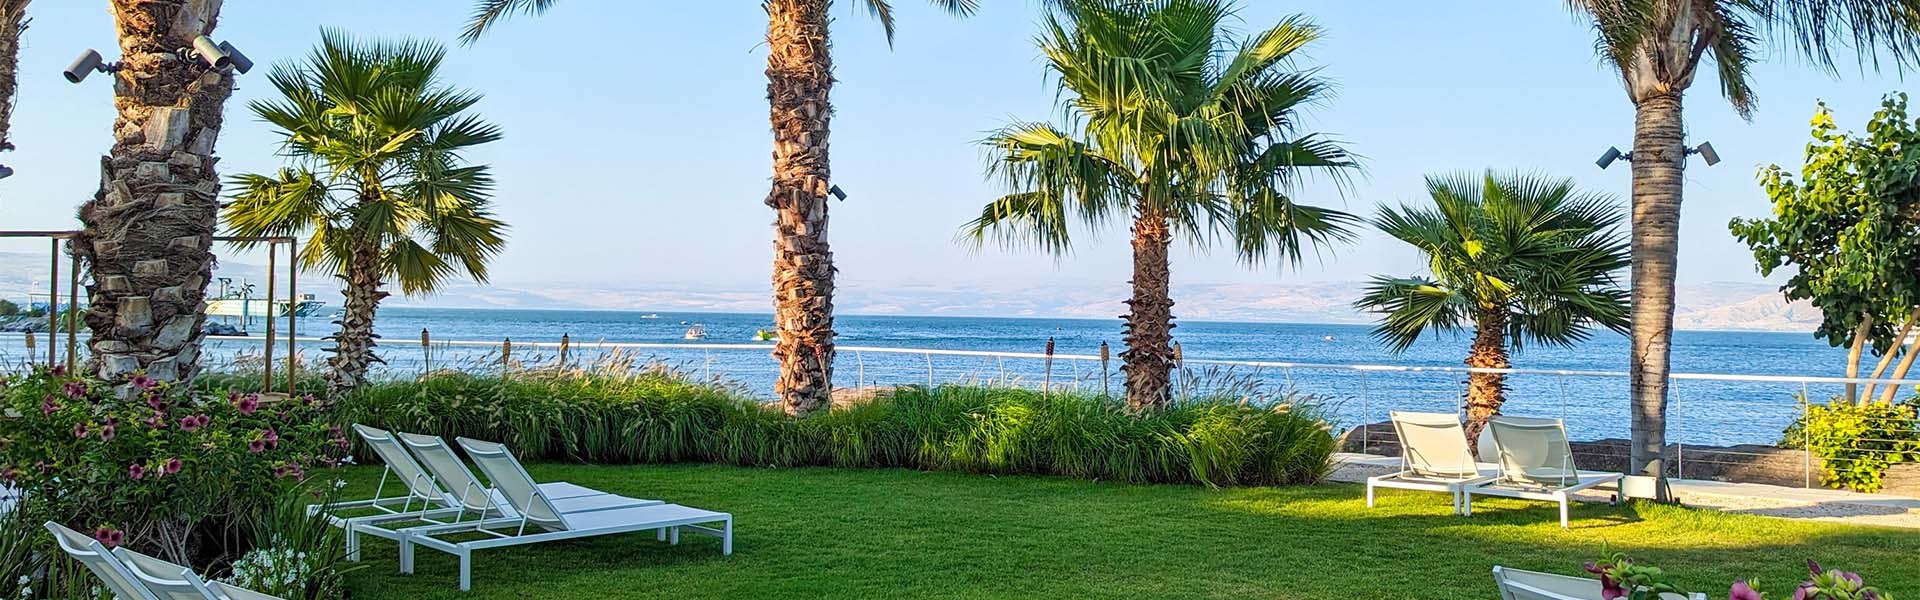 Galei Kinneret Hotel - Local Experience